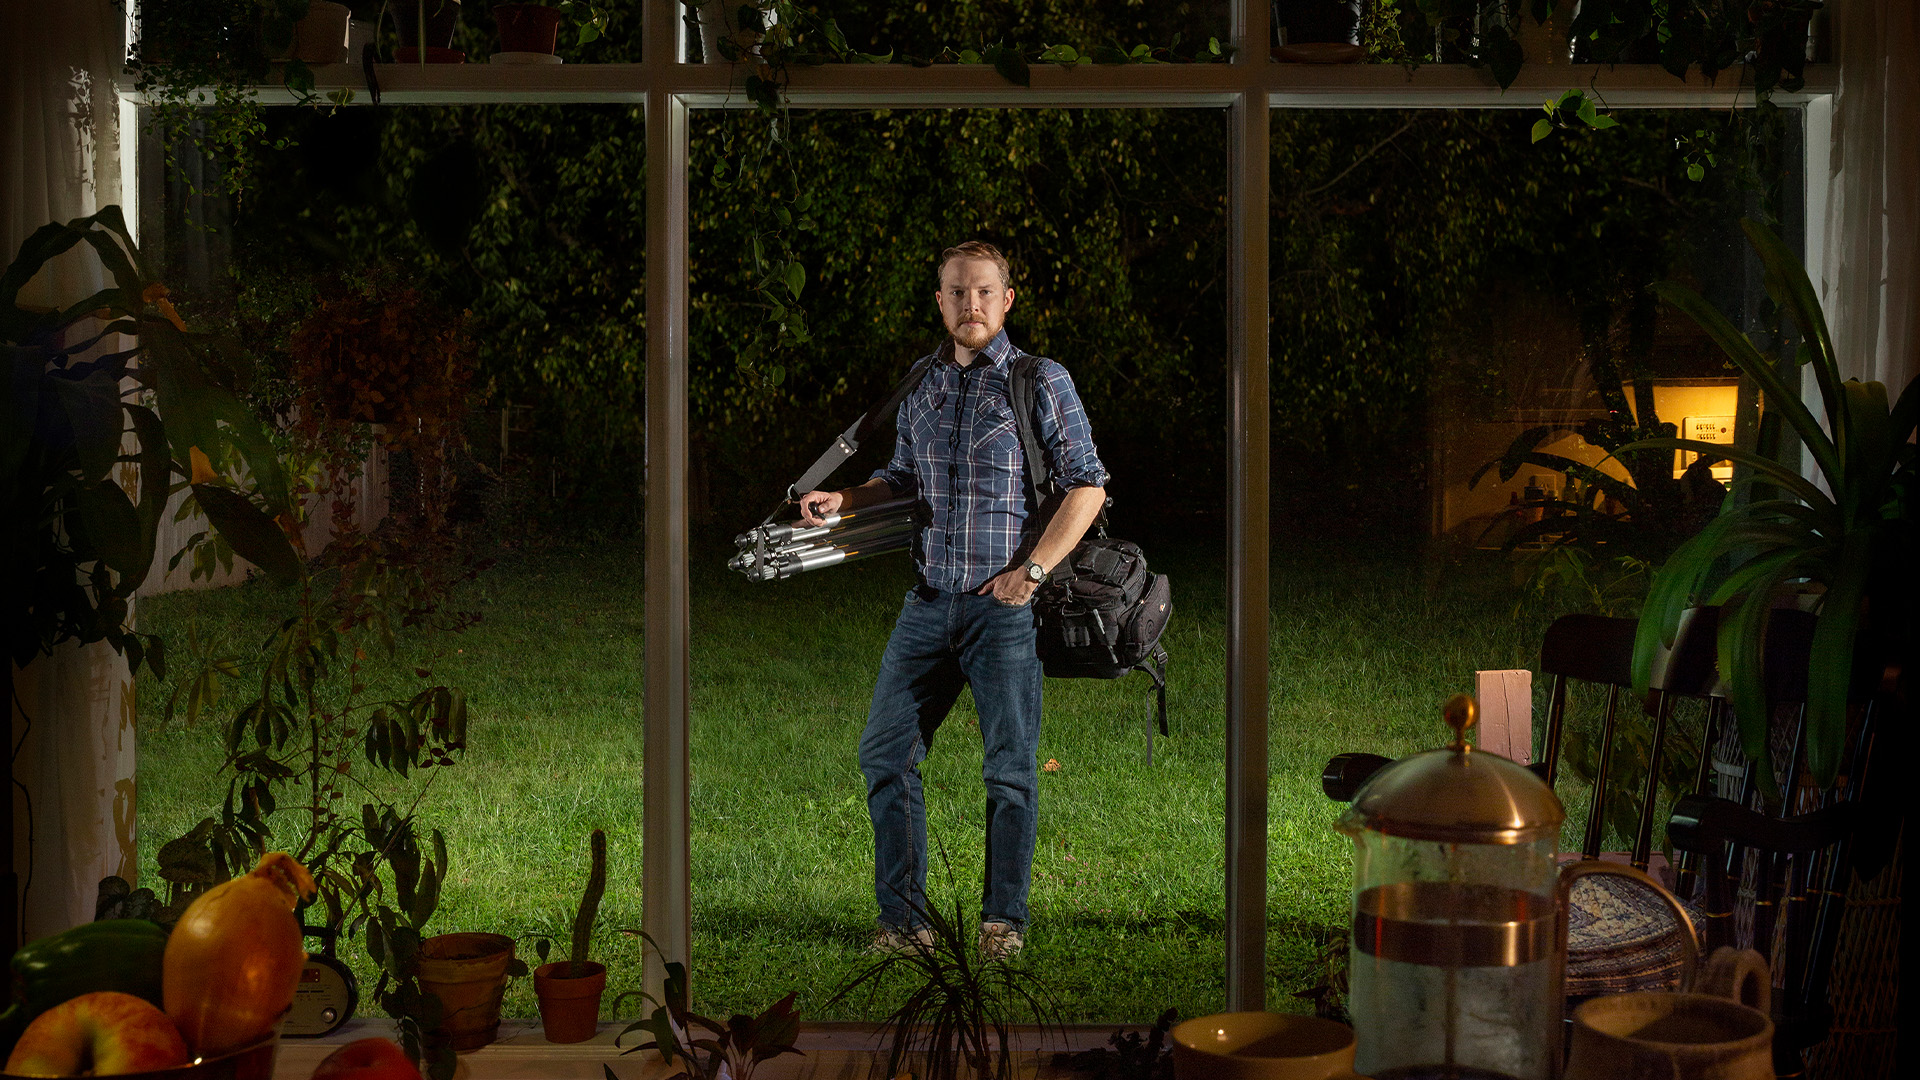 Self portrait photograph of Rob Southard holding photography equipment, in backyard, looking through picture window, 